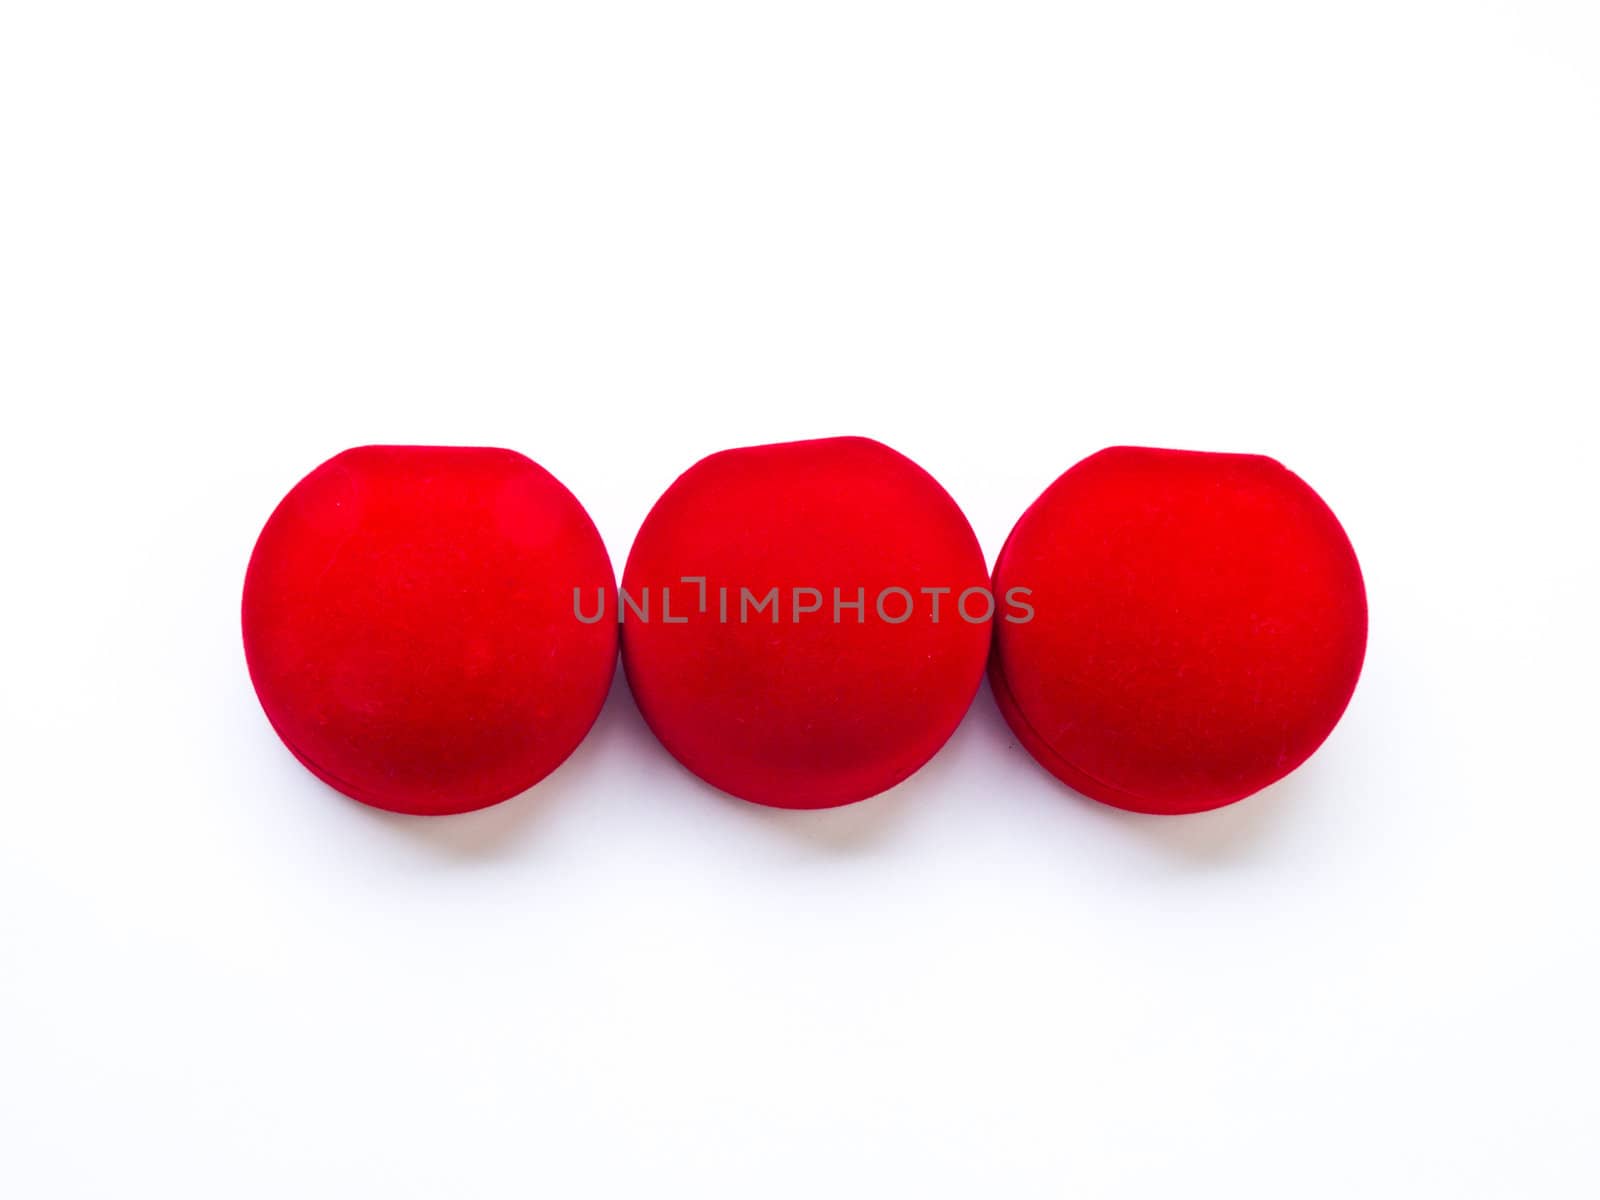 Closed round red jewelry boxes isolated on white background by gururugu